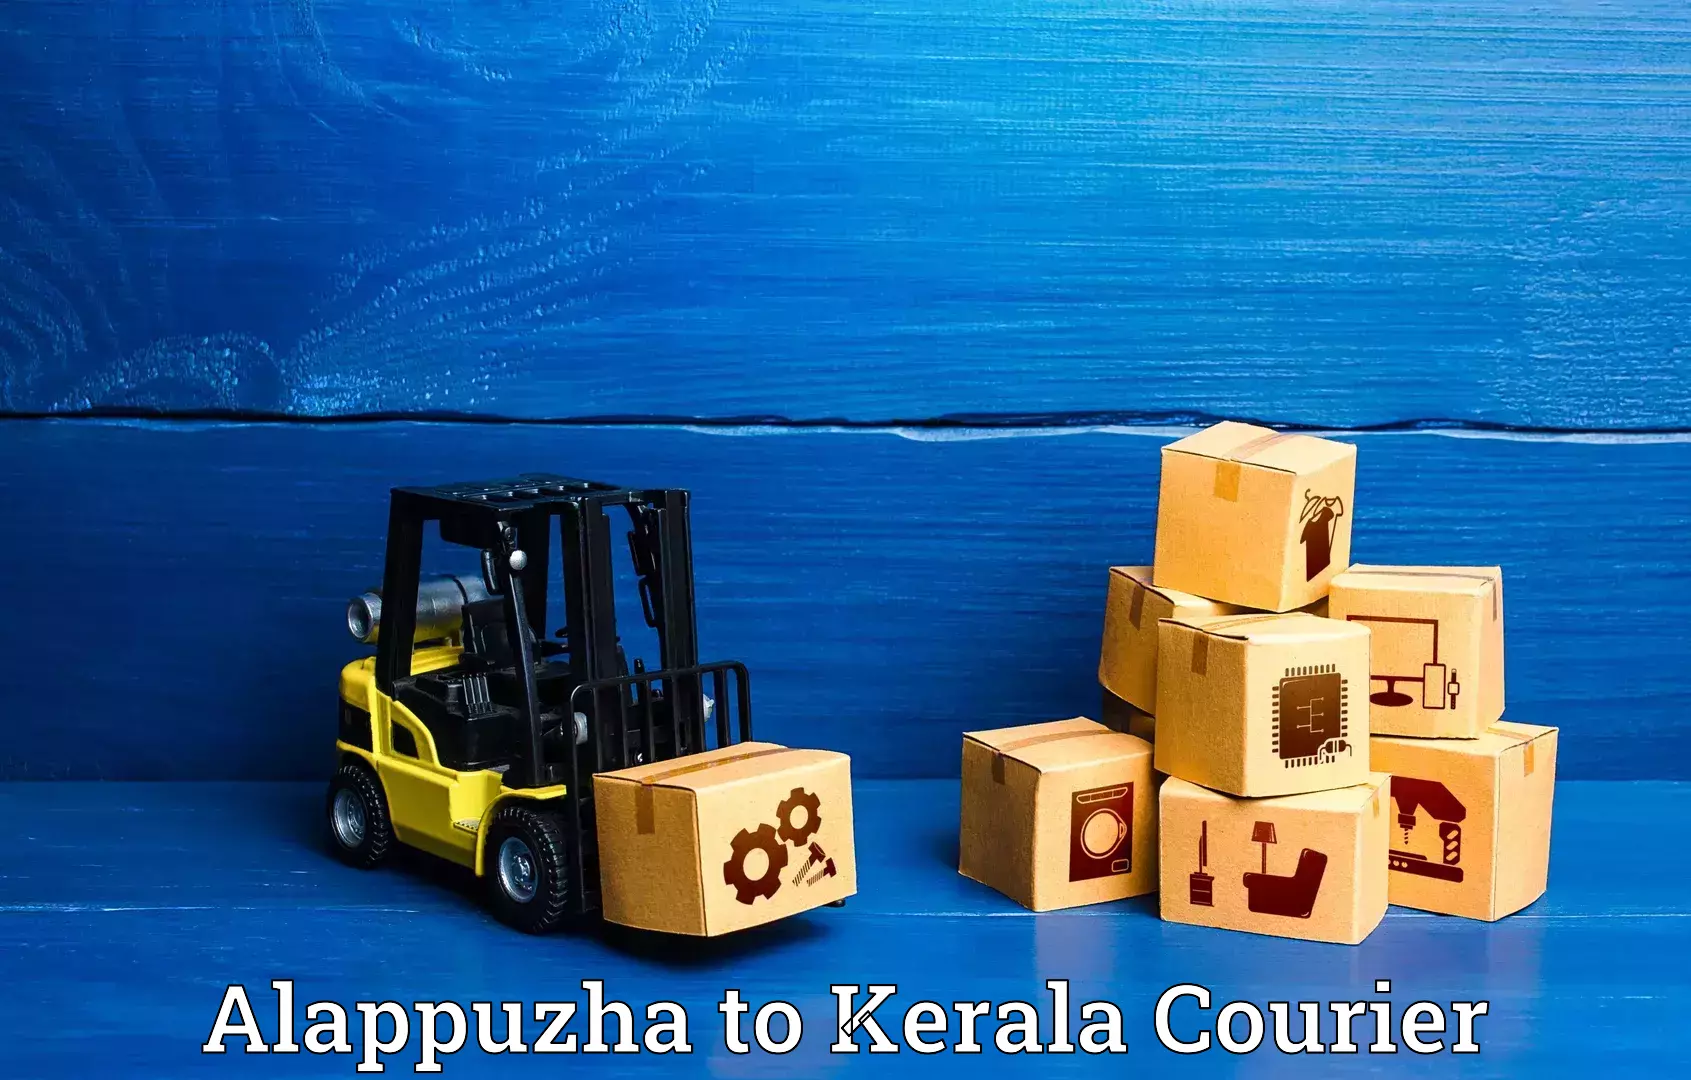 Luggage transport consulting Alappuzha to Kerala